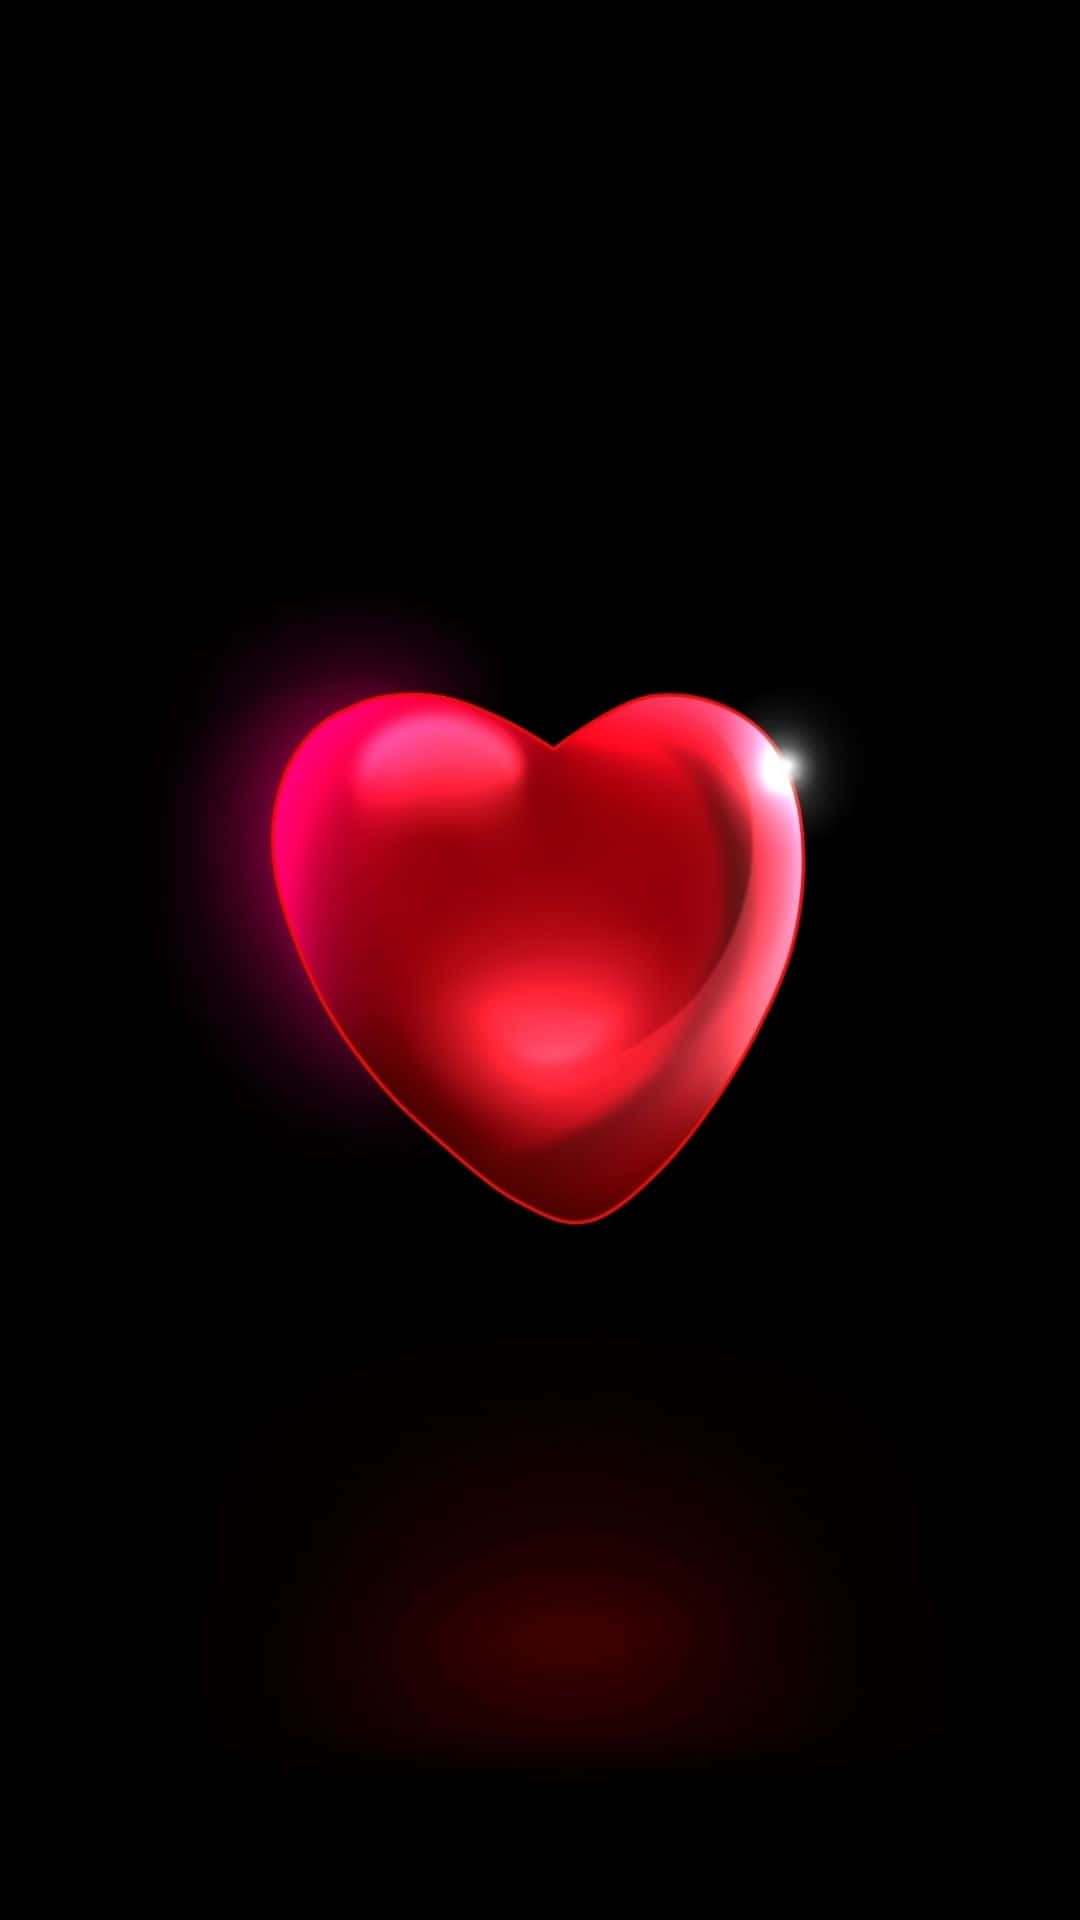 Download Show your love with a beautiful Red Heart! Wallpaper ...